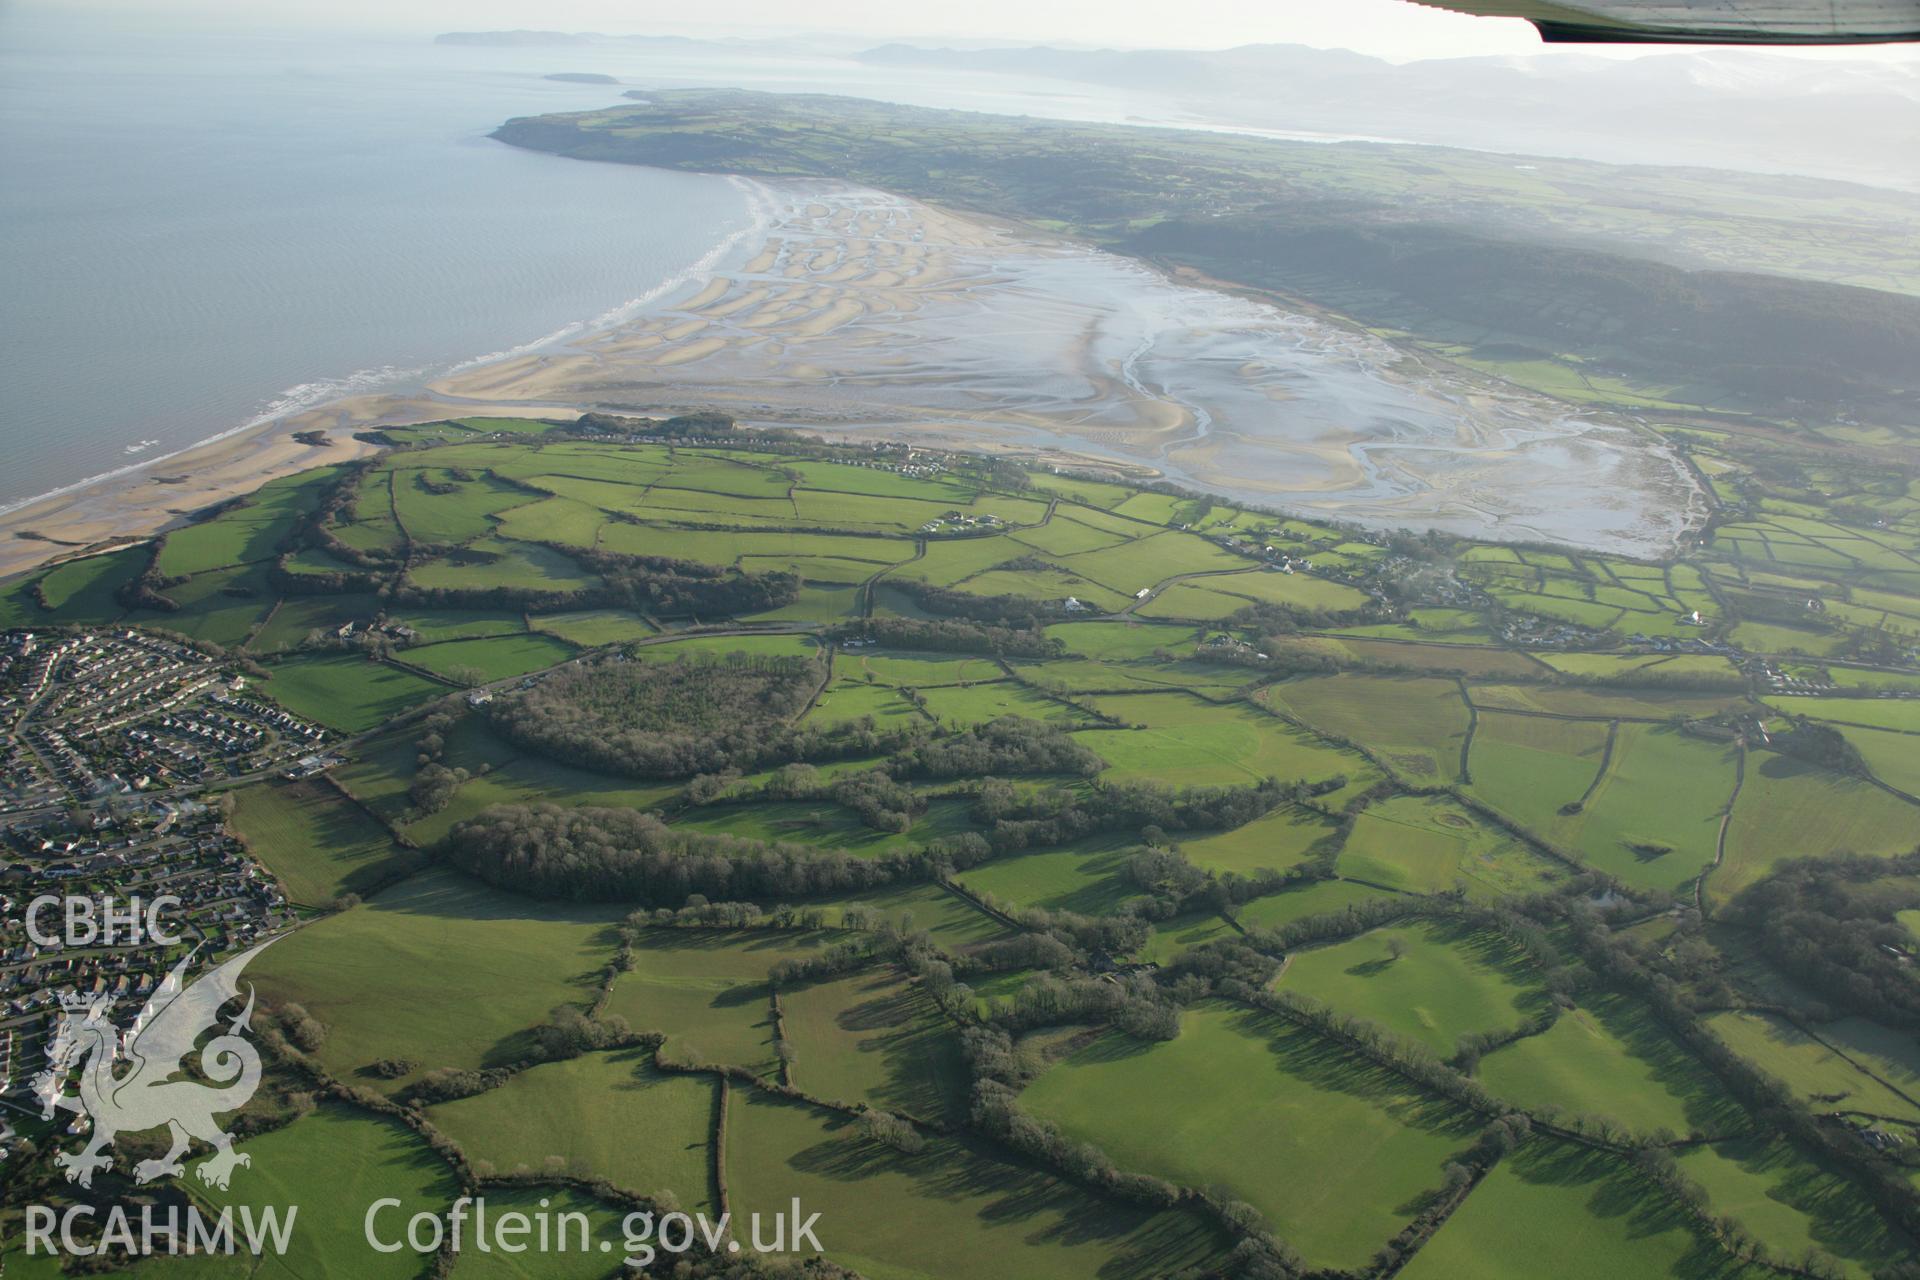 RCAHMW colour oblique aerial photograph of the Viking settlement at Glyn, Llanbedrgoch. Taken on 25 January 2007 by Toby Driver